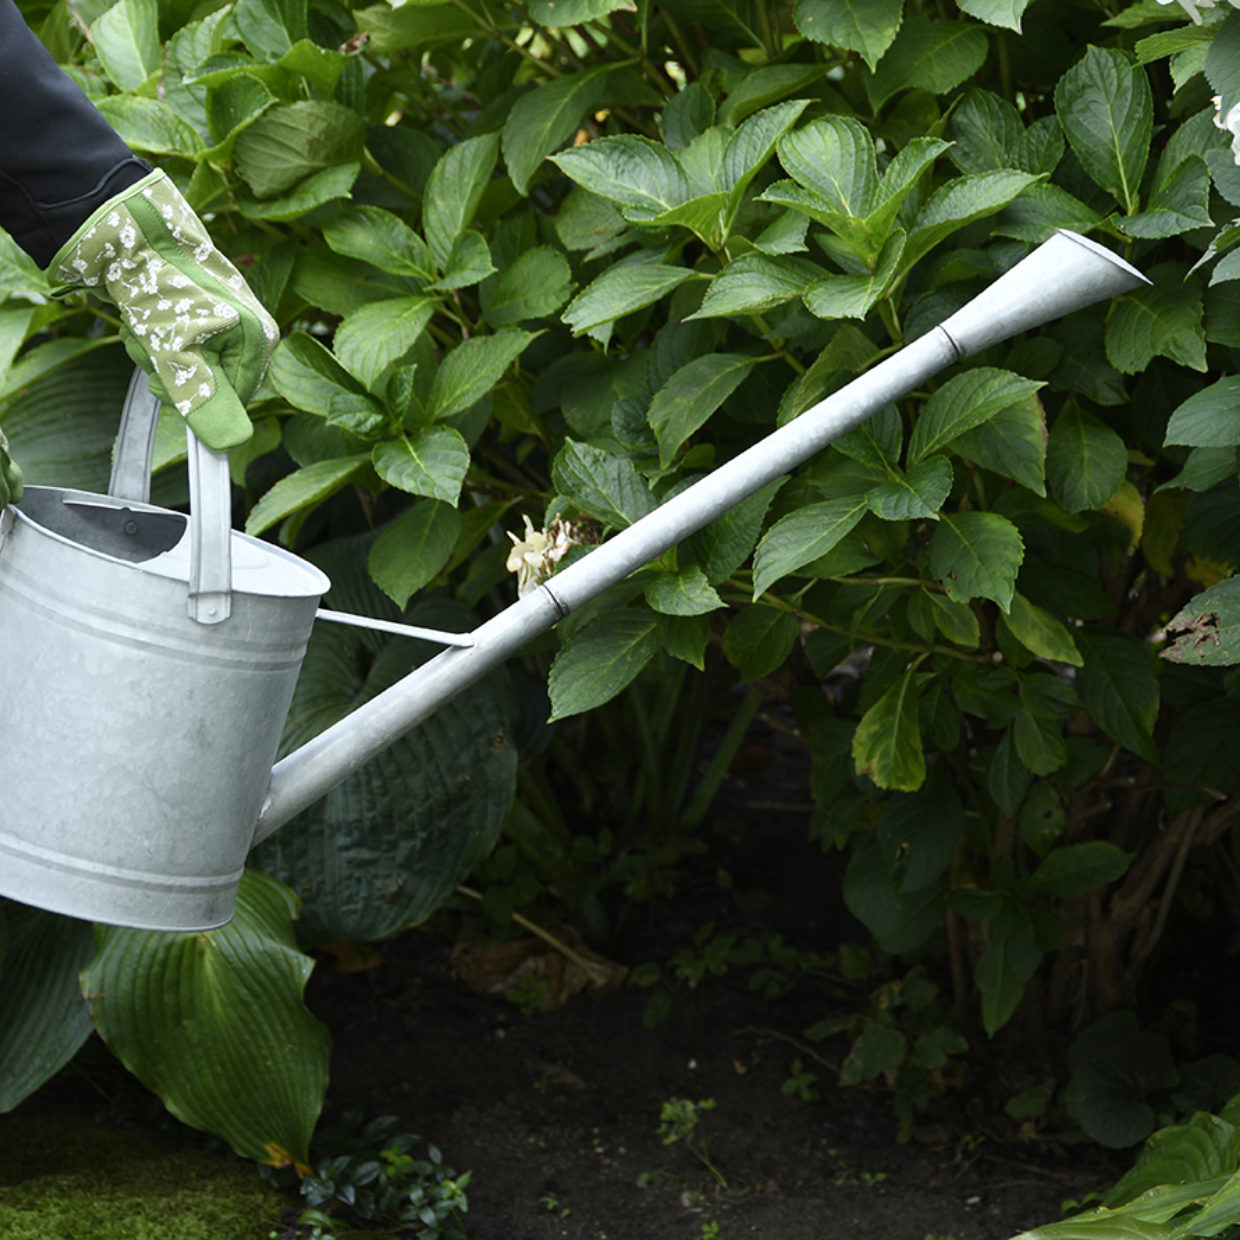 The Long Spout Watering Can